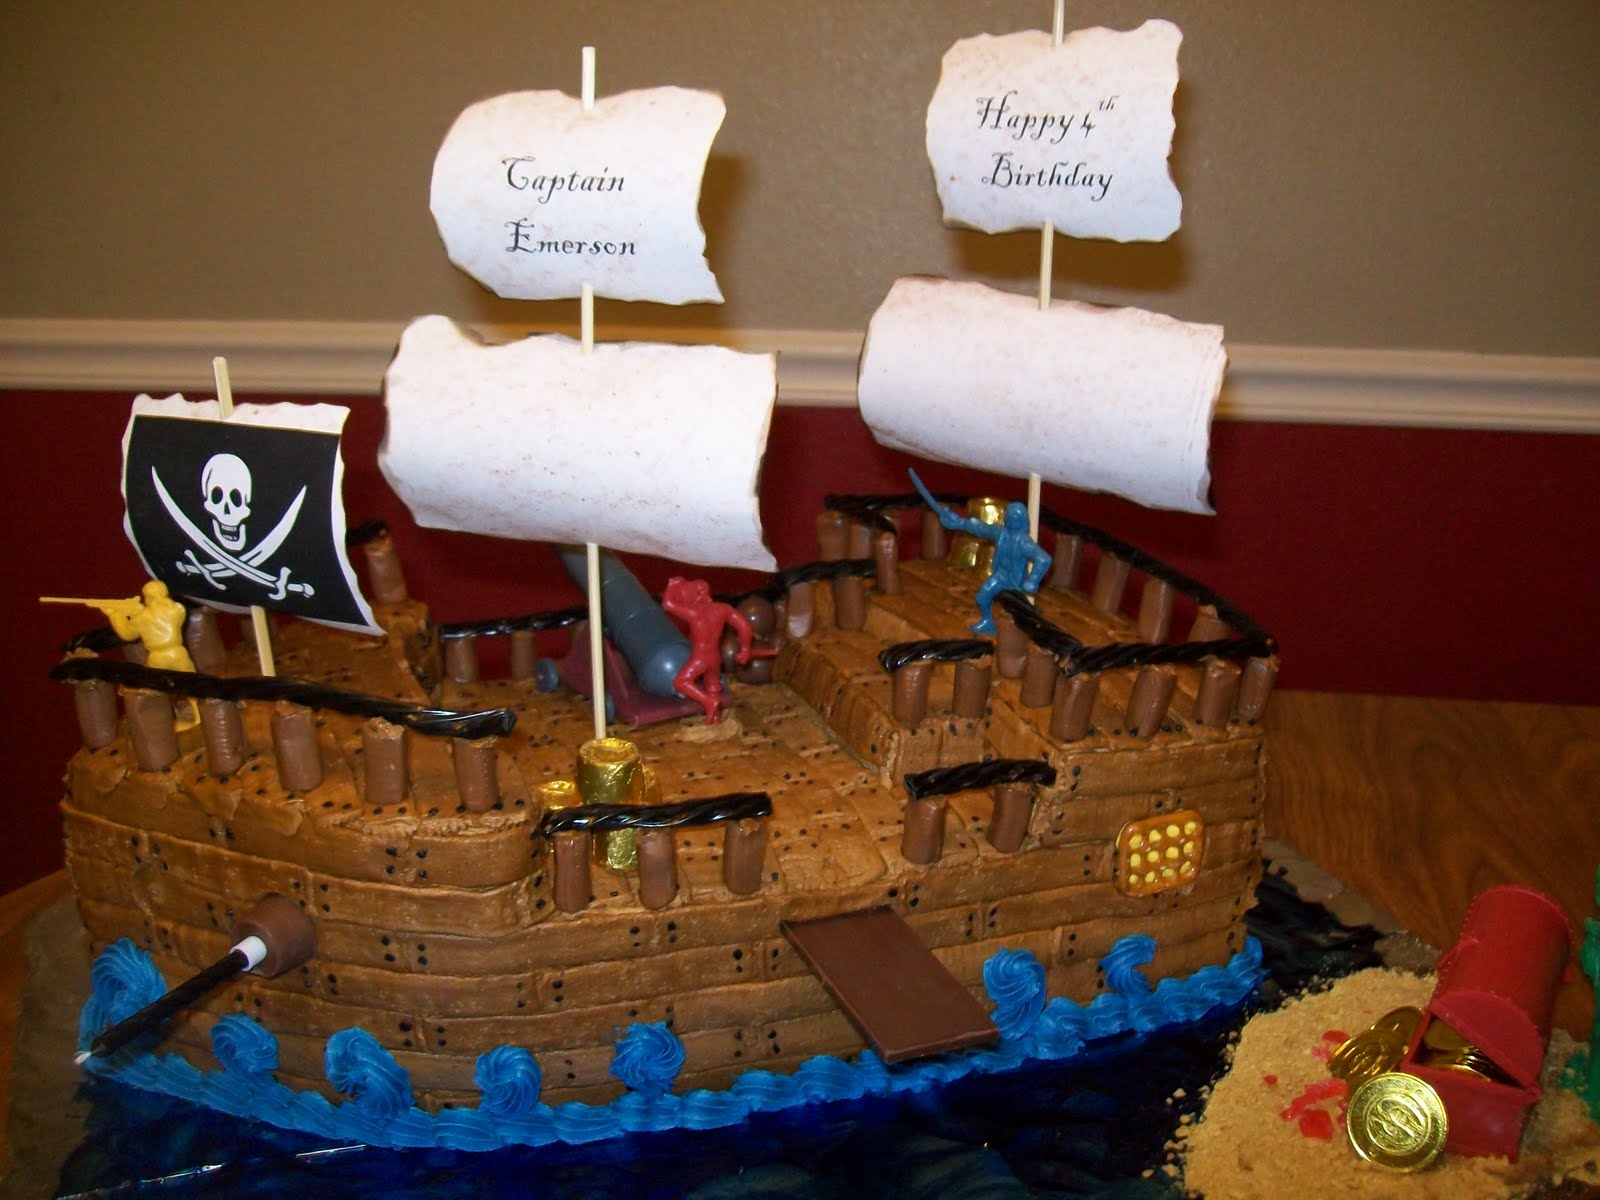 Grateful for the Ride: Pirate Ship cake